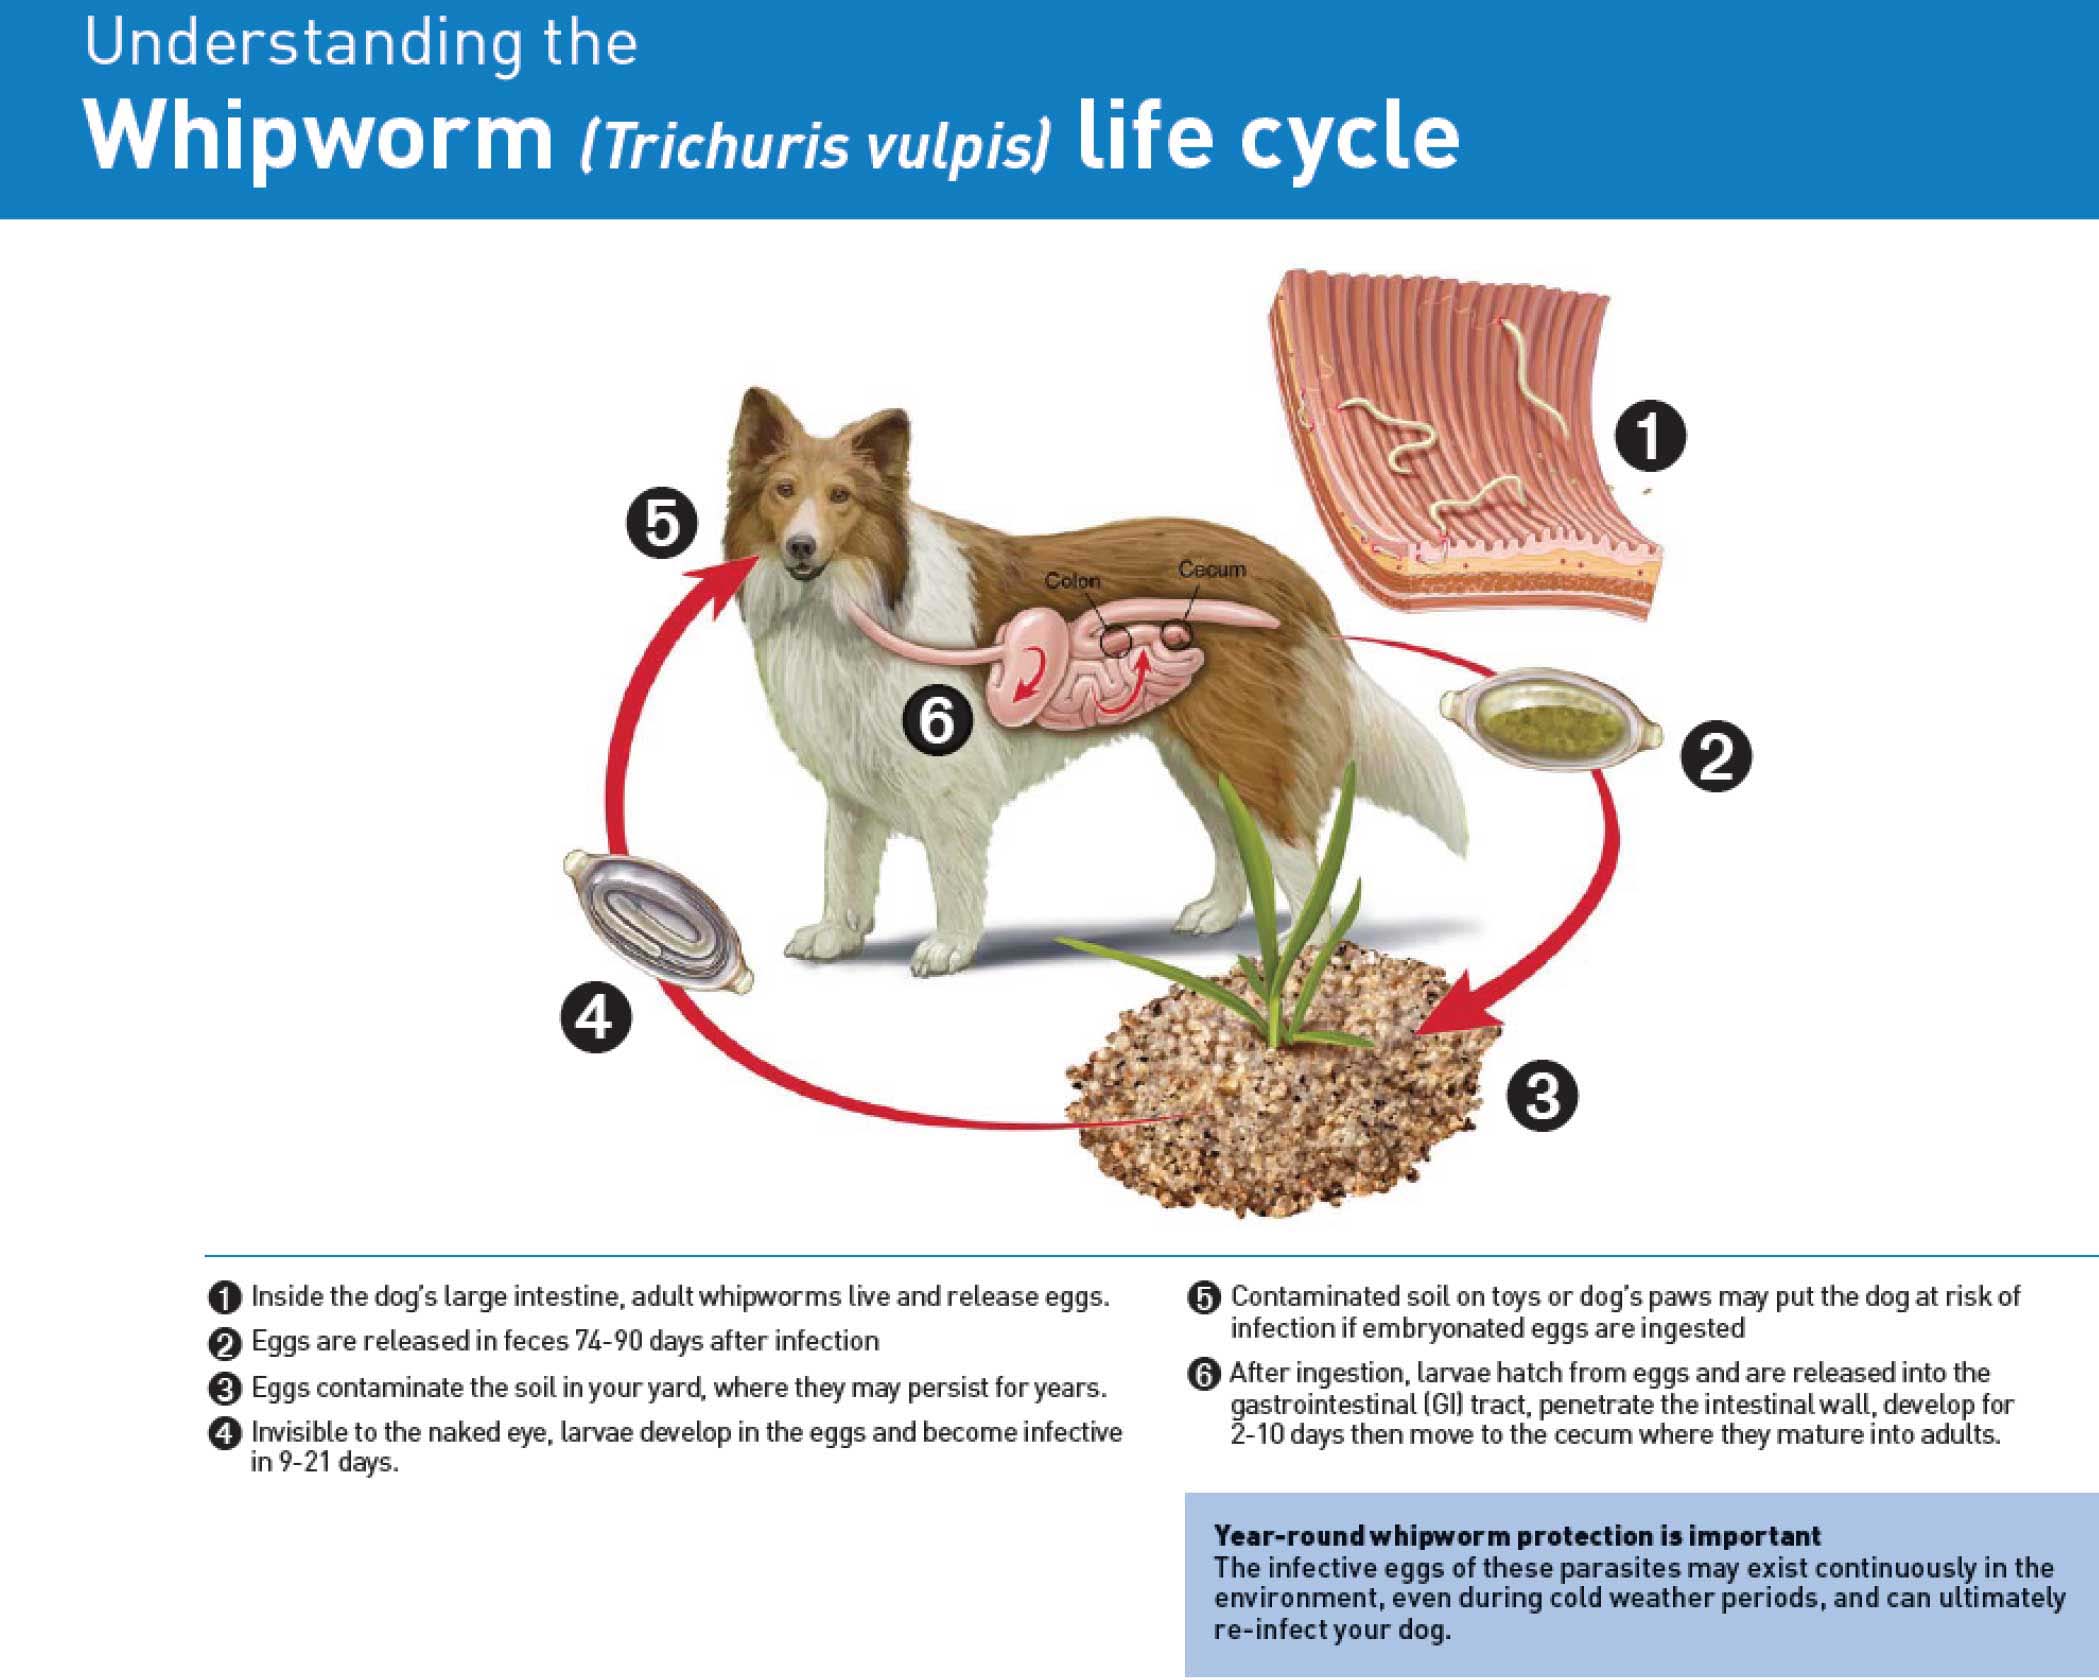 Whipworm lifecycle